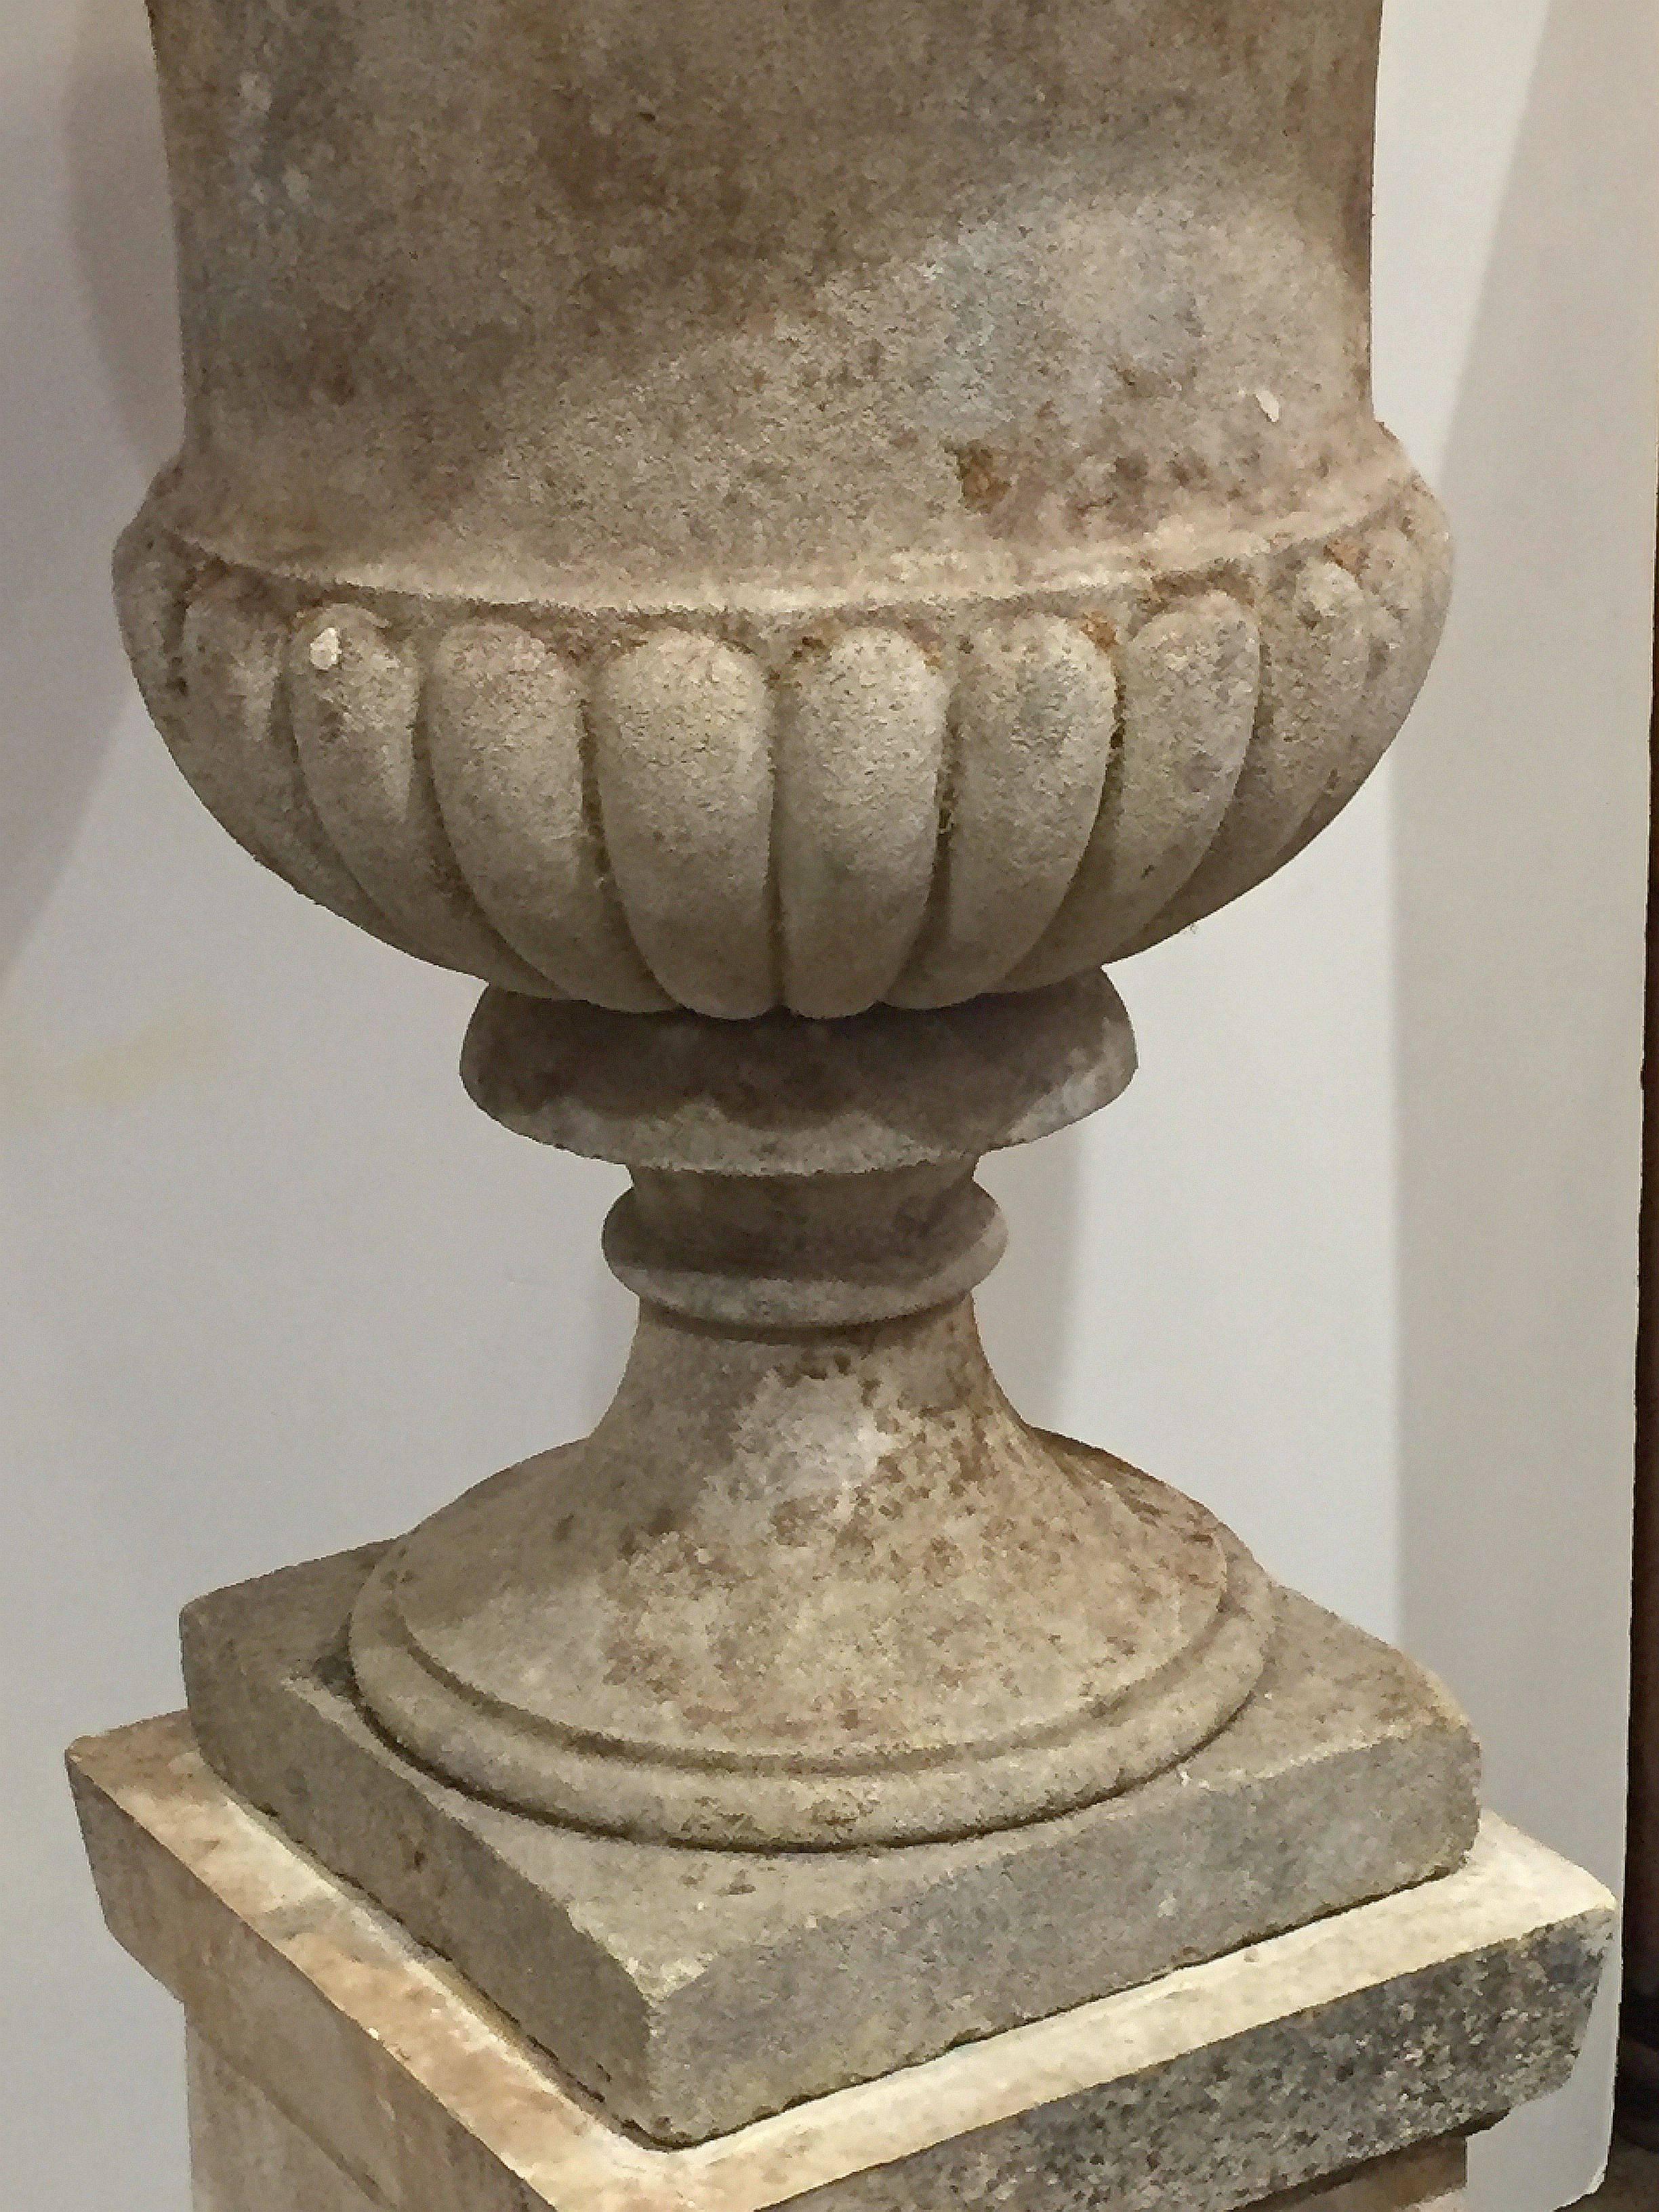 20th Century English Garden Stone Urn on Plinth in the Classical Style